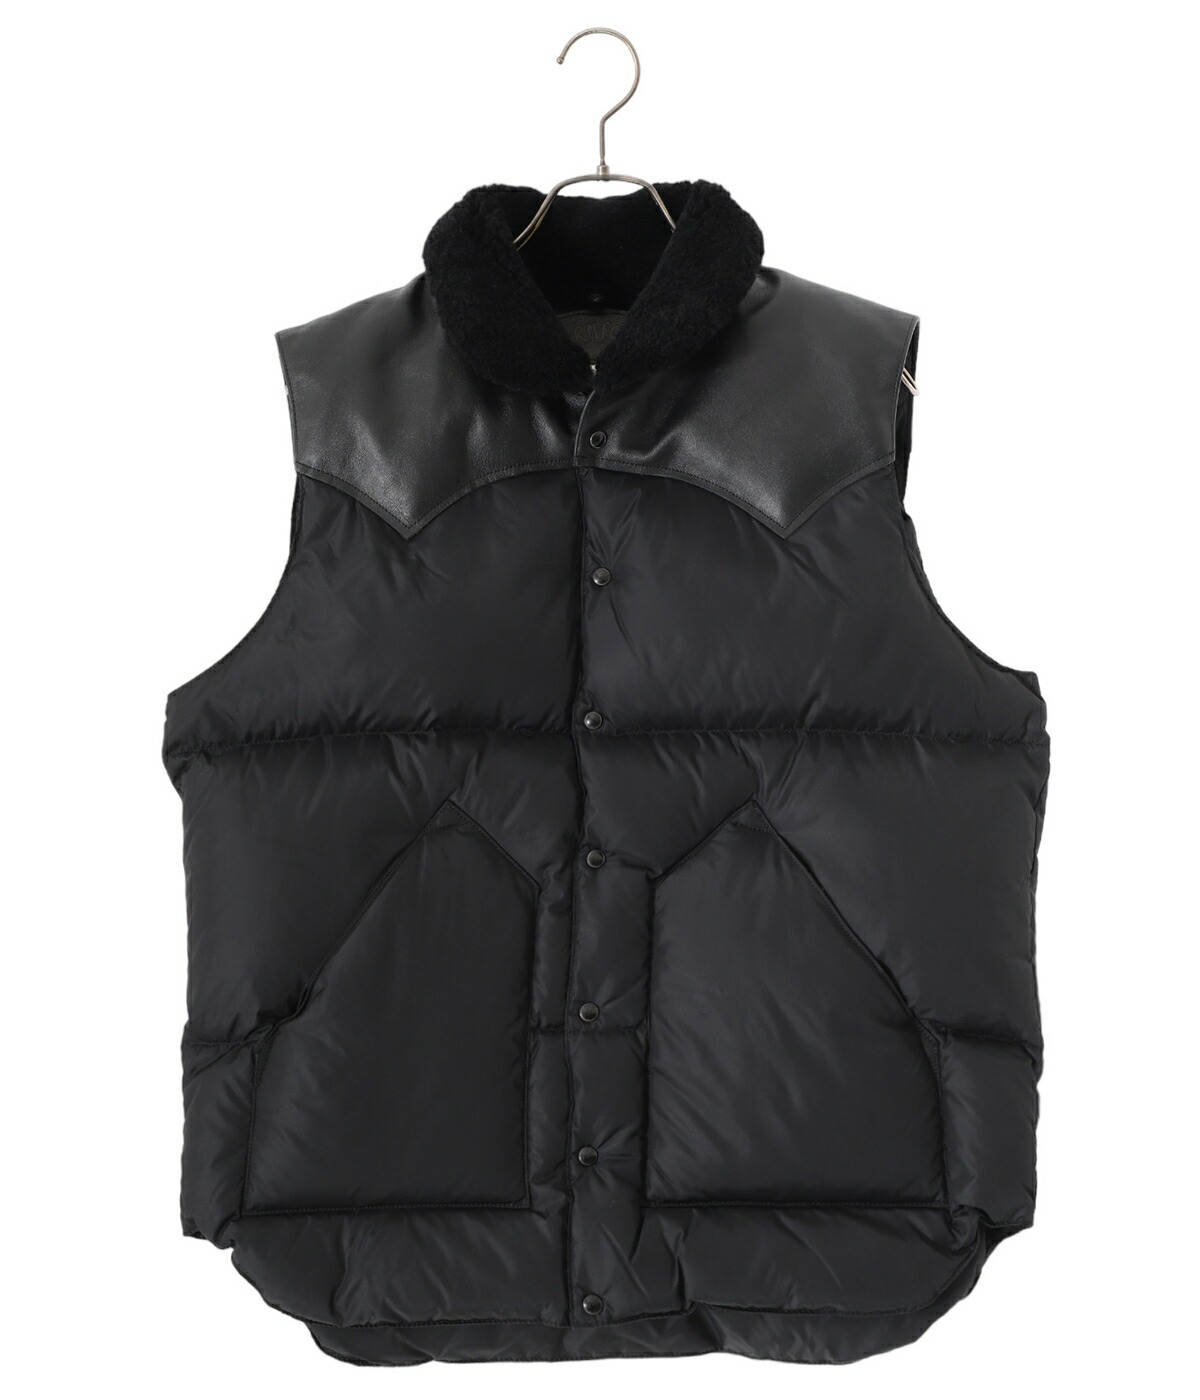 ROCKY MOUNTAIN FEATHER BED / ロッキーマウンテンフェザーベッド ： CHRISTY VEST / 全3色 ：  200-232-02